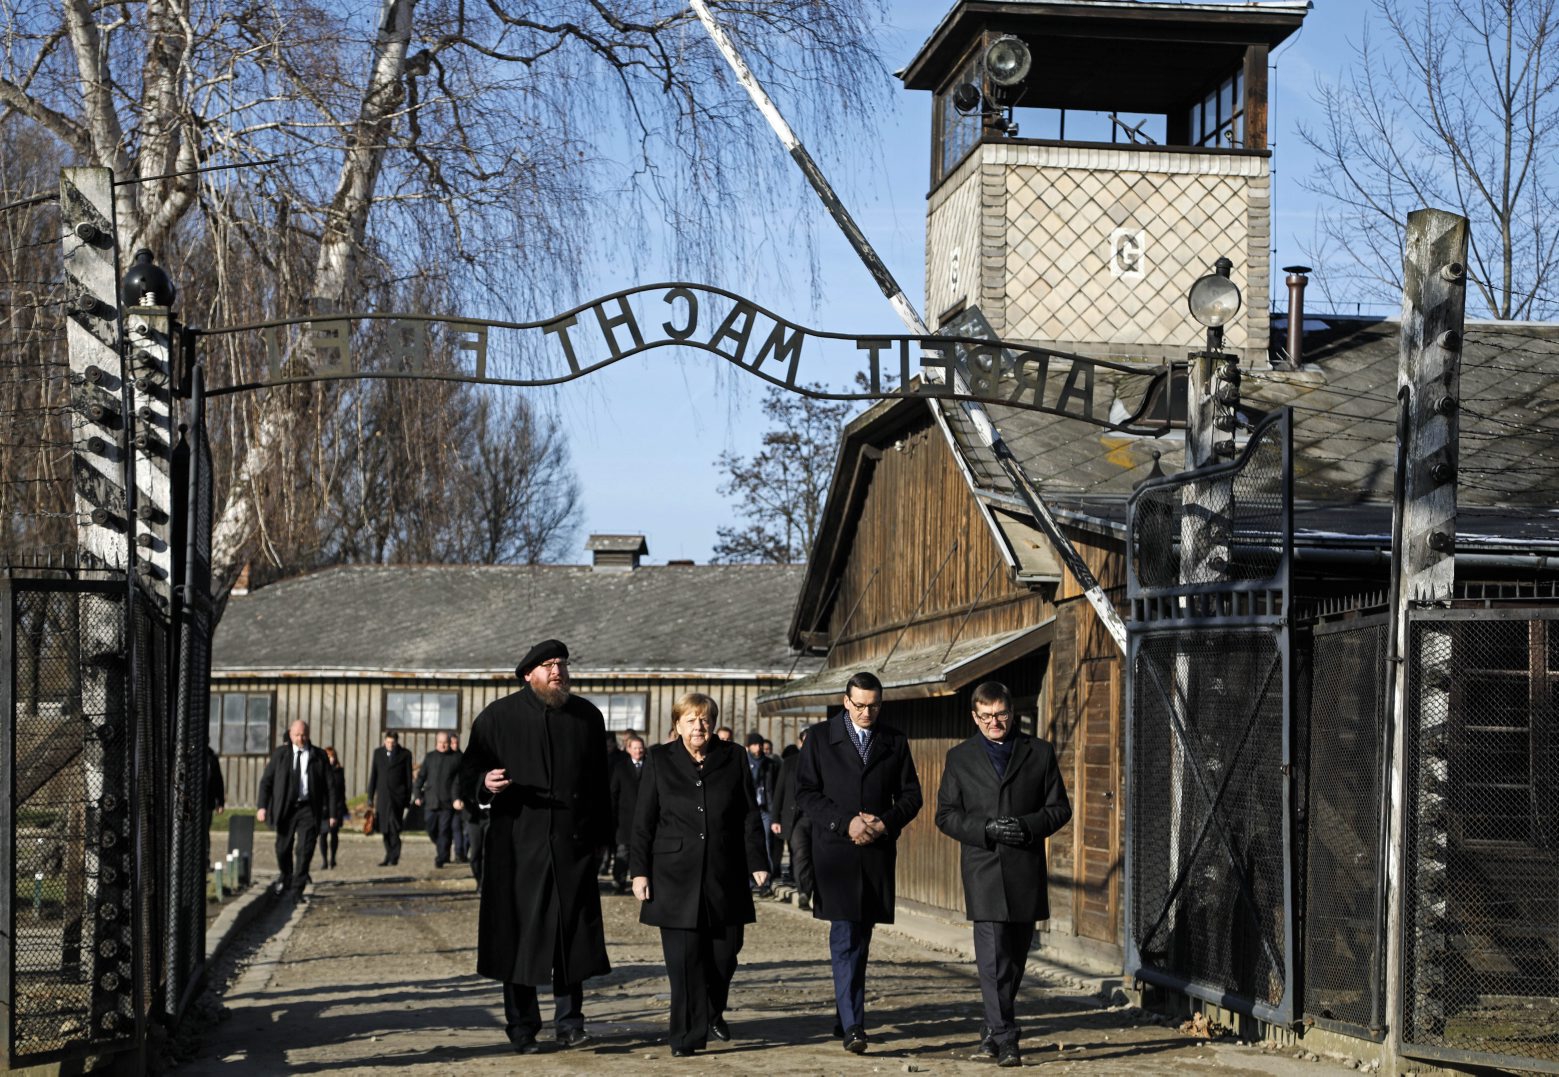 Museum director Piotr Cywinski, German Chancellor Angela Merkel, Polish Prime Minister Mateusz Morawiecki and deputy director Andrzej Kacorzyk, from left, visit the former Nazi death camp of Auschwitz-Birkenau in Oswiecim, Poland on Friday, Friday, Dec. 6, 2019. Merkel attend an event in occasion of the 10th anniversary of the founding of the Auschwitz Foundation. (Photo/Markus Schreiber) Poland Germany Auschwitz